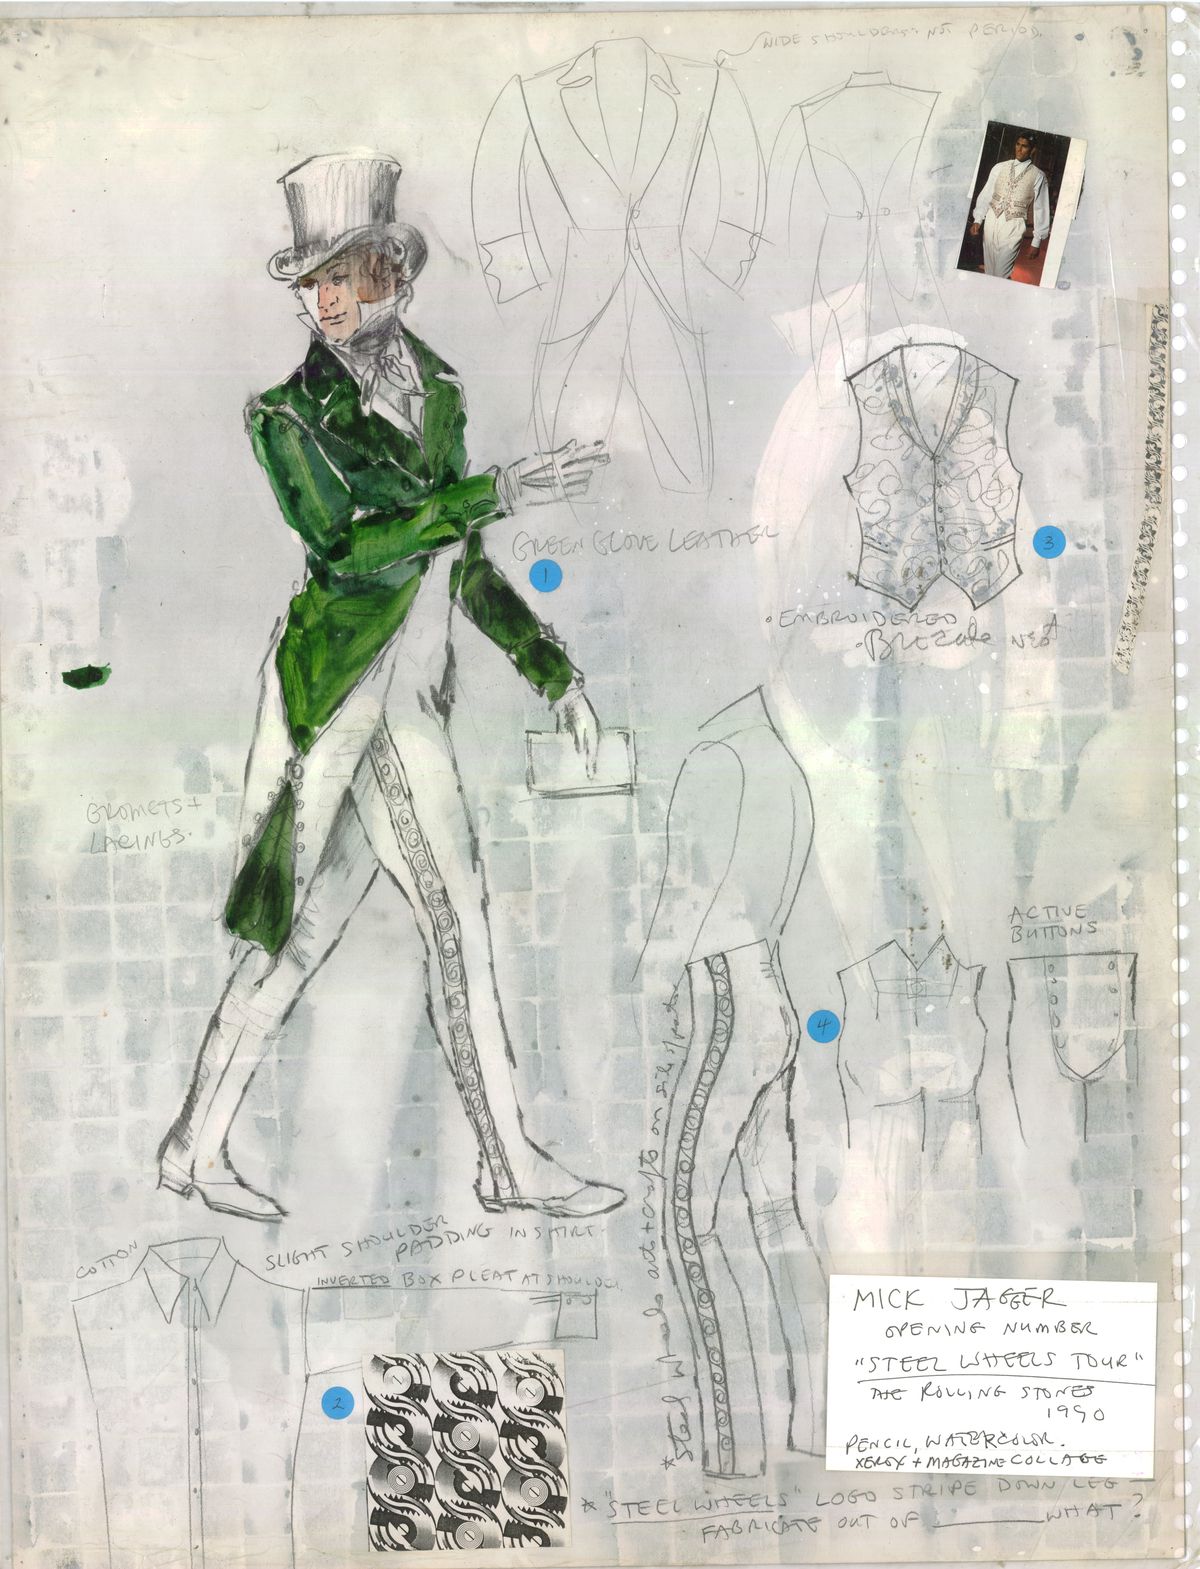 William Ivey Long’s sketch for Mick Jagger, Rolling Stones: Steel Wheels Tour.  The green leather jacket is inspired by the Great Britain’s Regency period (during the reign of King George III). The jacket features sleeves that tied onto the shoulder, with